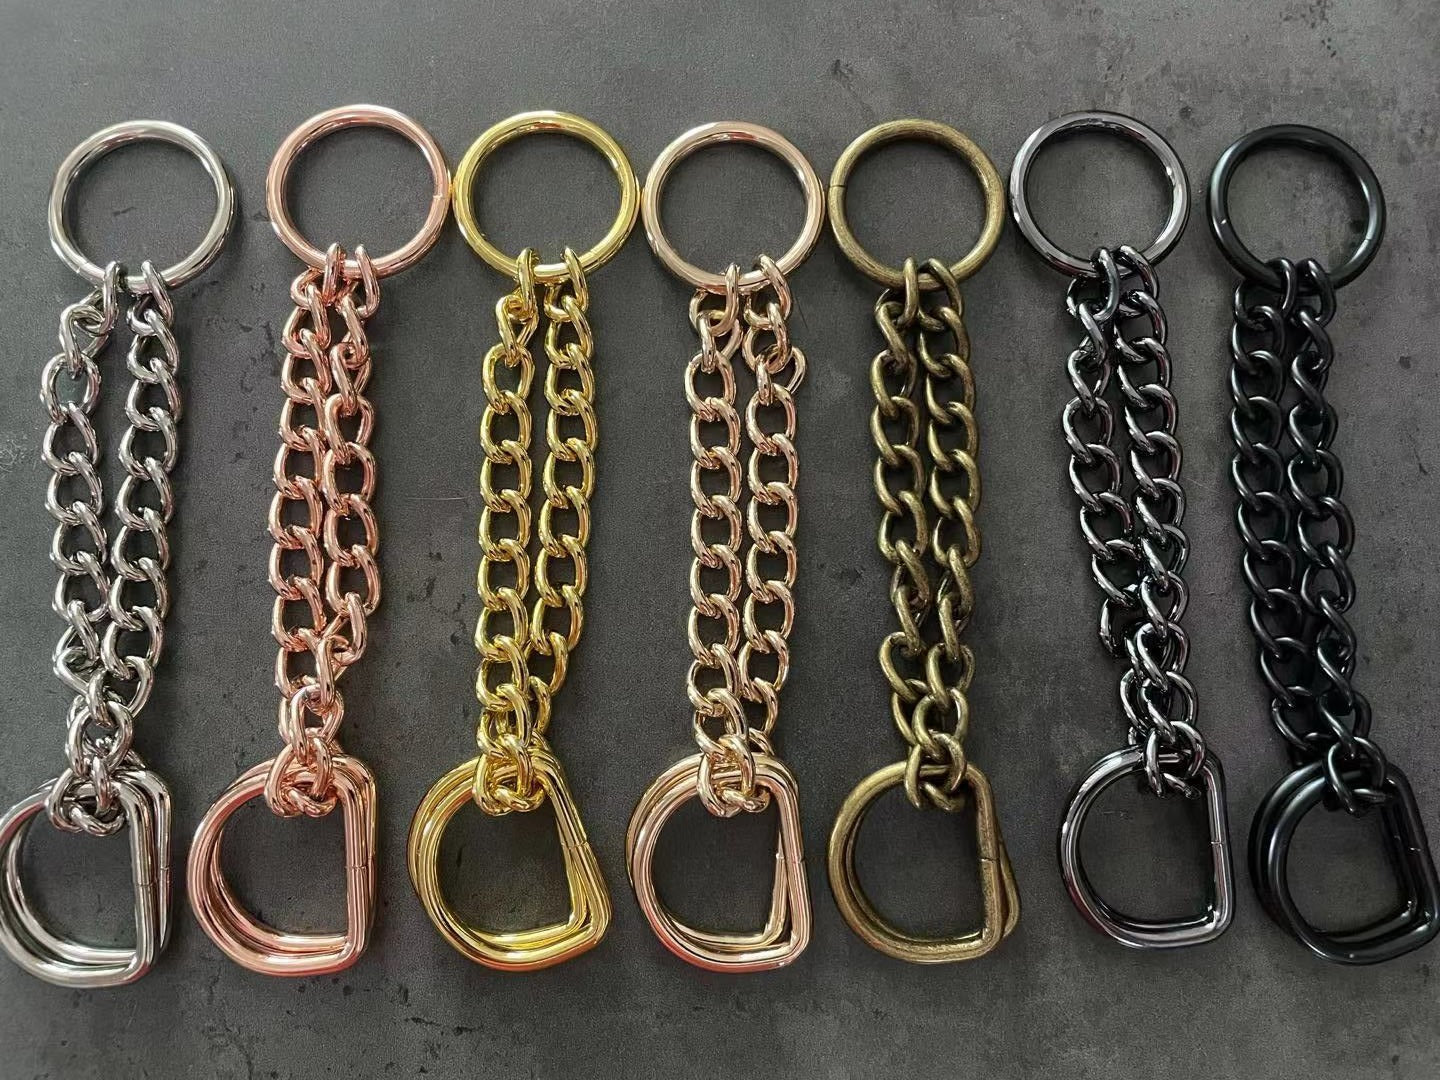 5 sets, Martingale Collar hardware sets, weld chain & rings-5 colors